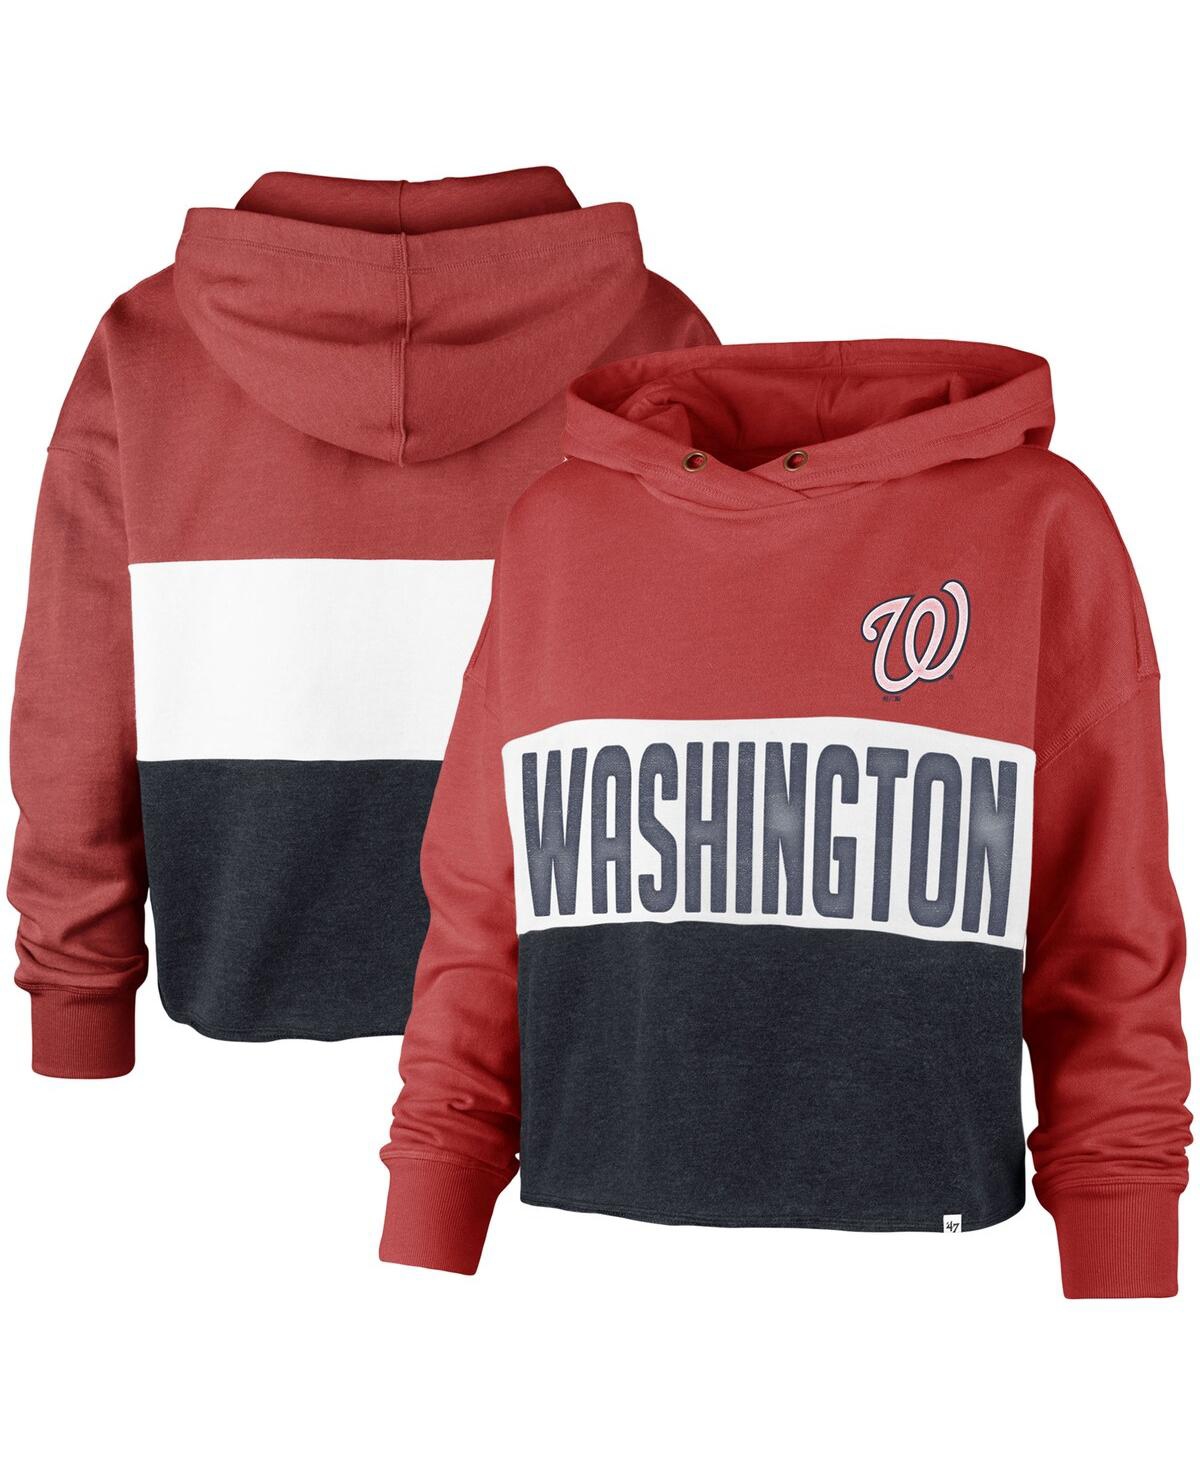 Women's '47 Heathered Red and Heathered Navy Washington Nationals Lizzy Cropped Pullover Hoodie - Heathered Red, Heathered Navy